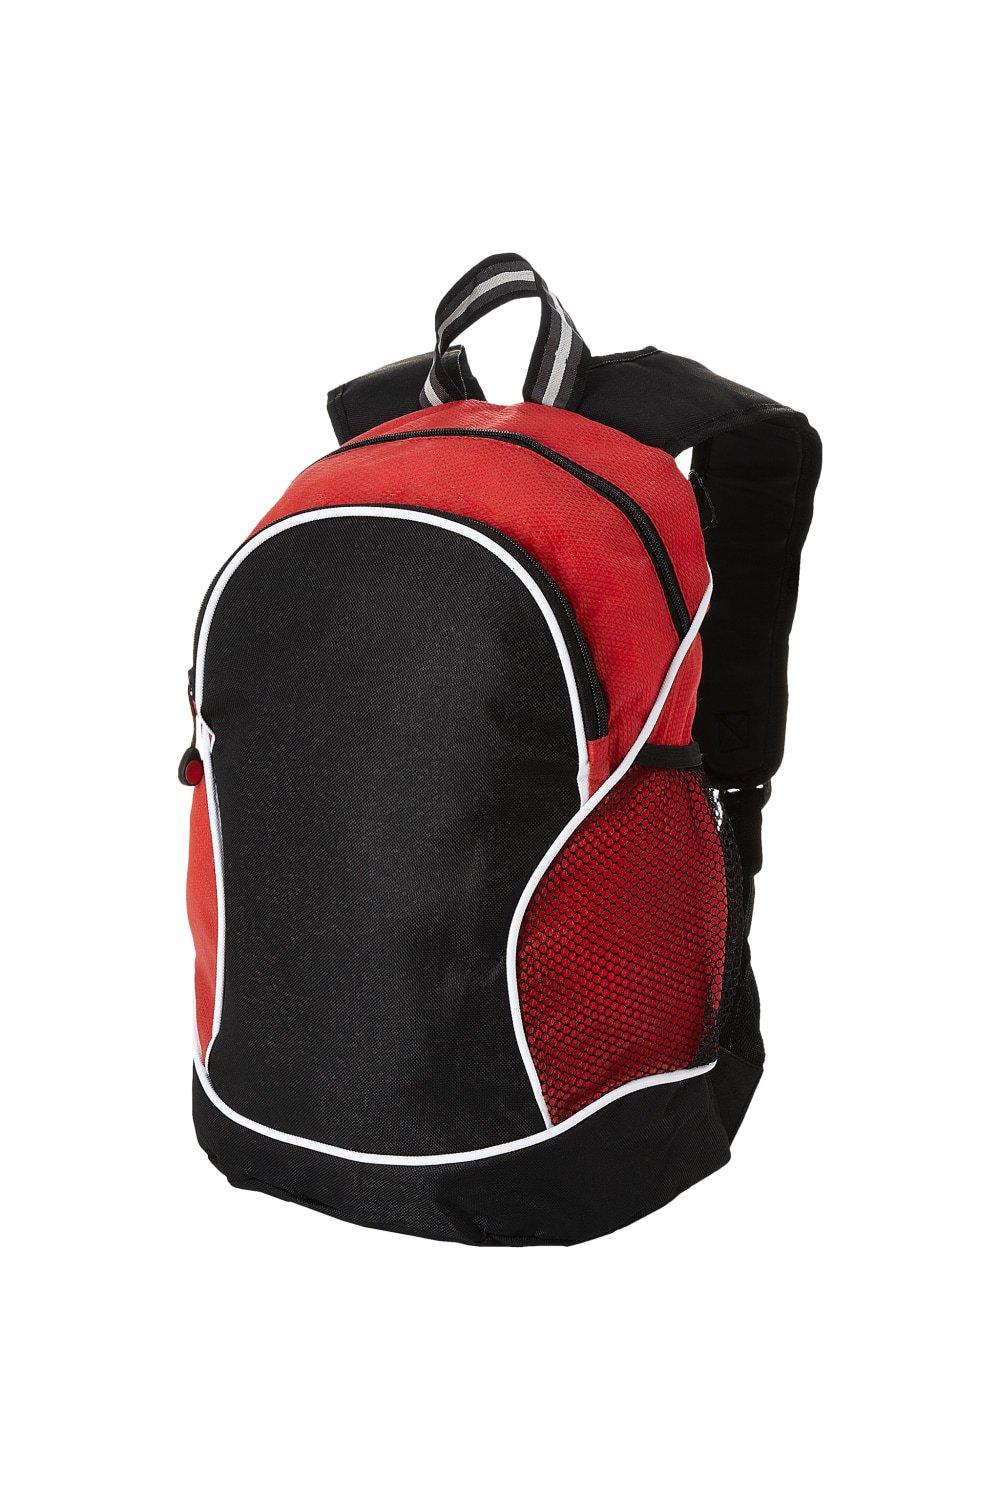 Bullet  Boomerang Backpack (29 x 18 x 42 cm) (Solid Black/Red)